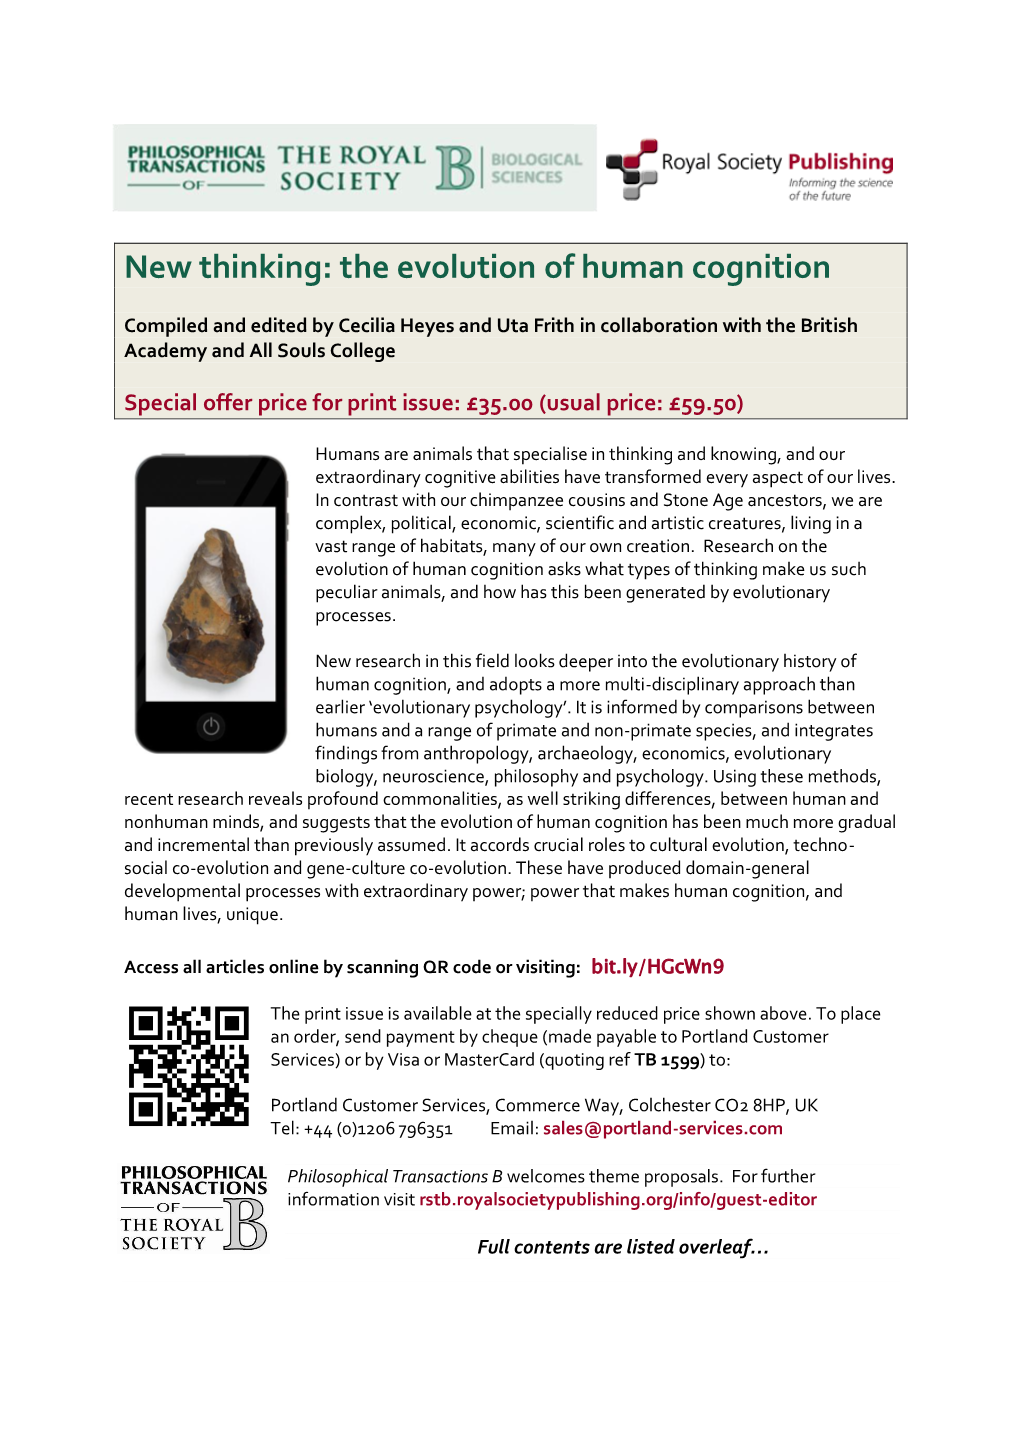 The Evolution of Human Cognition